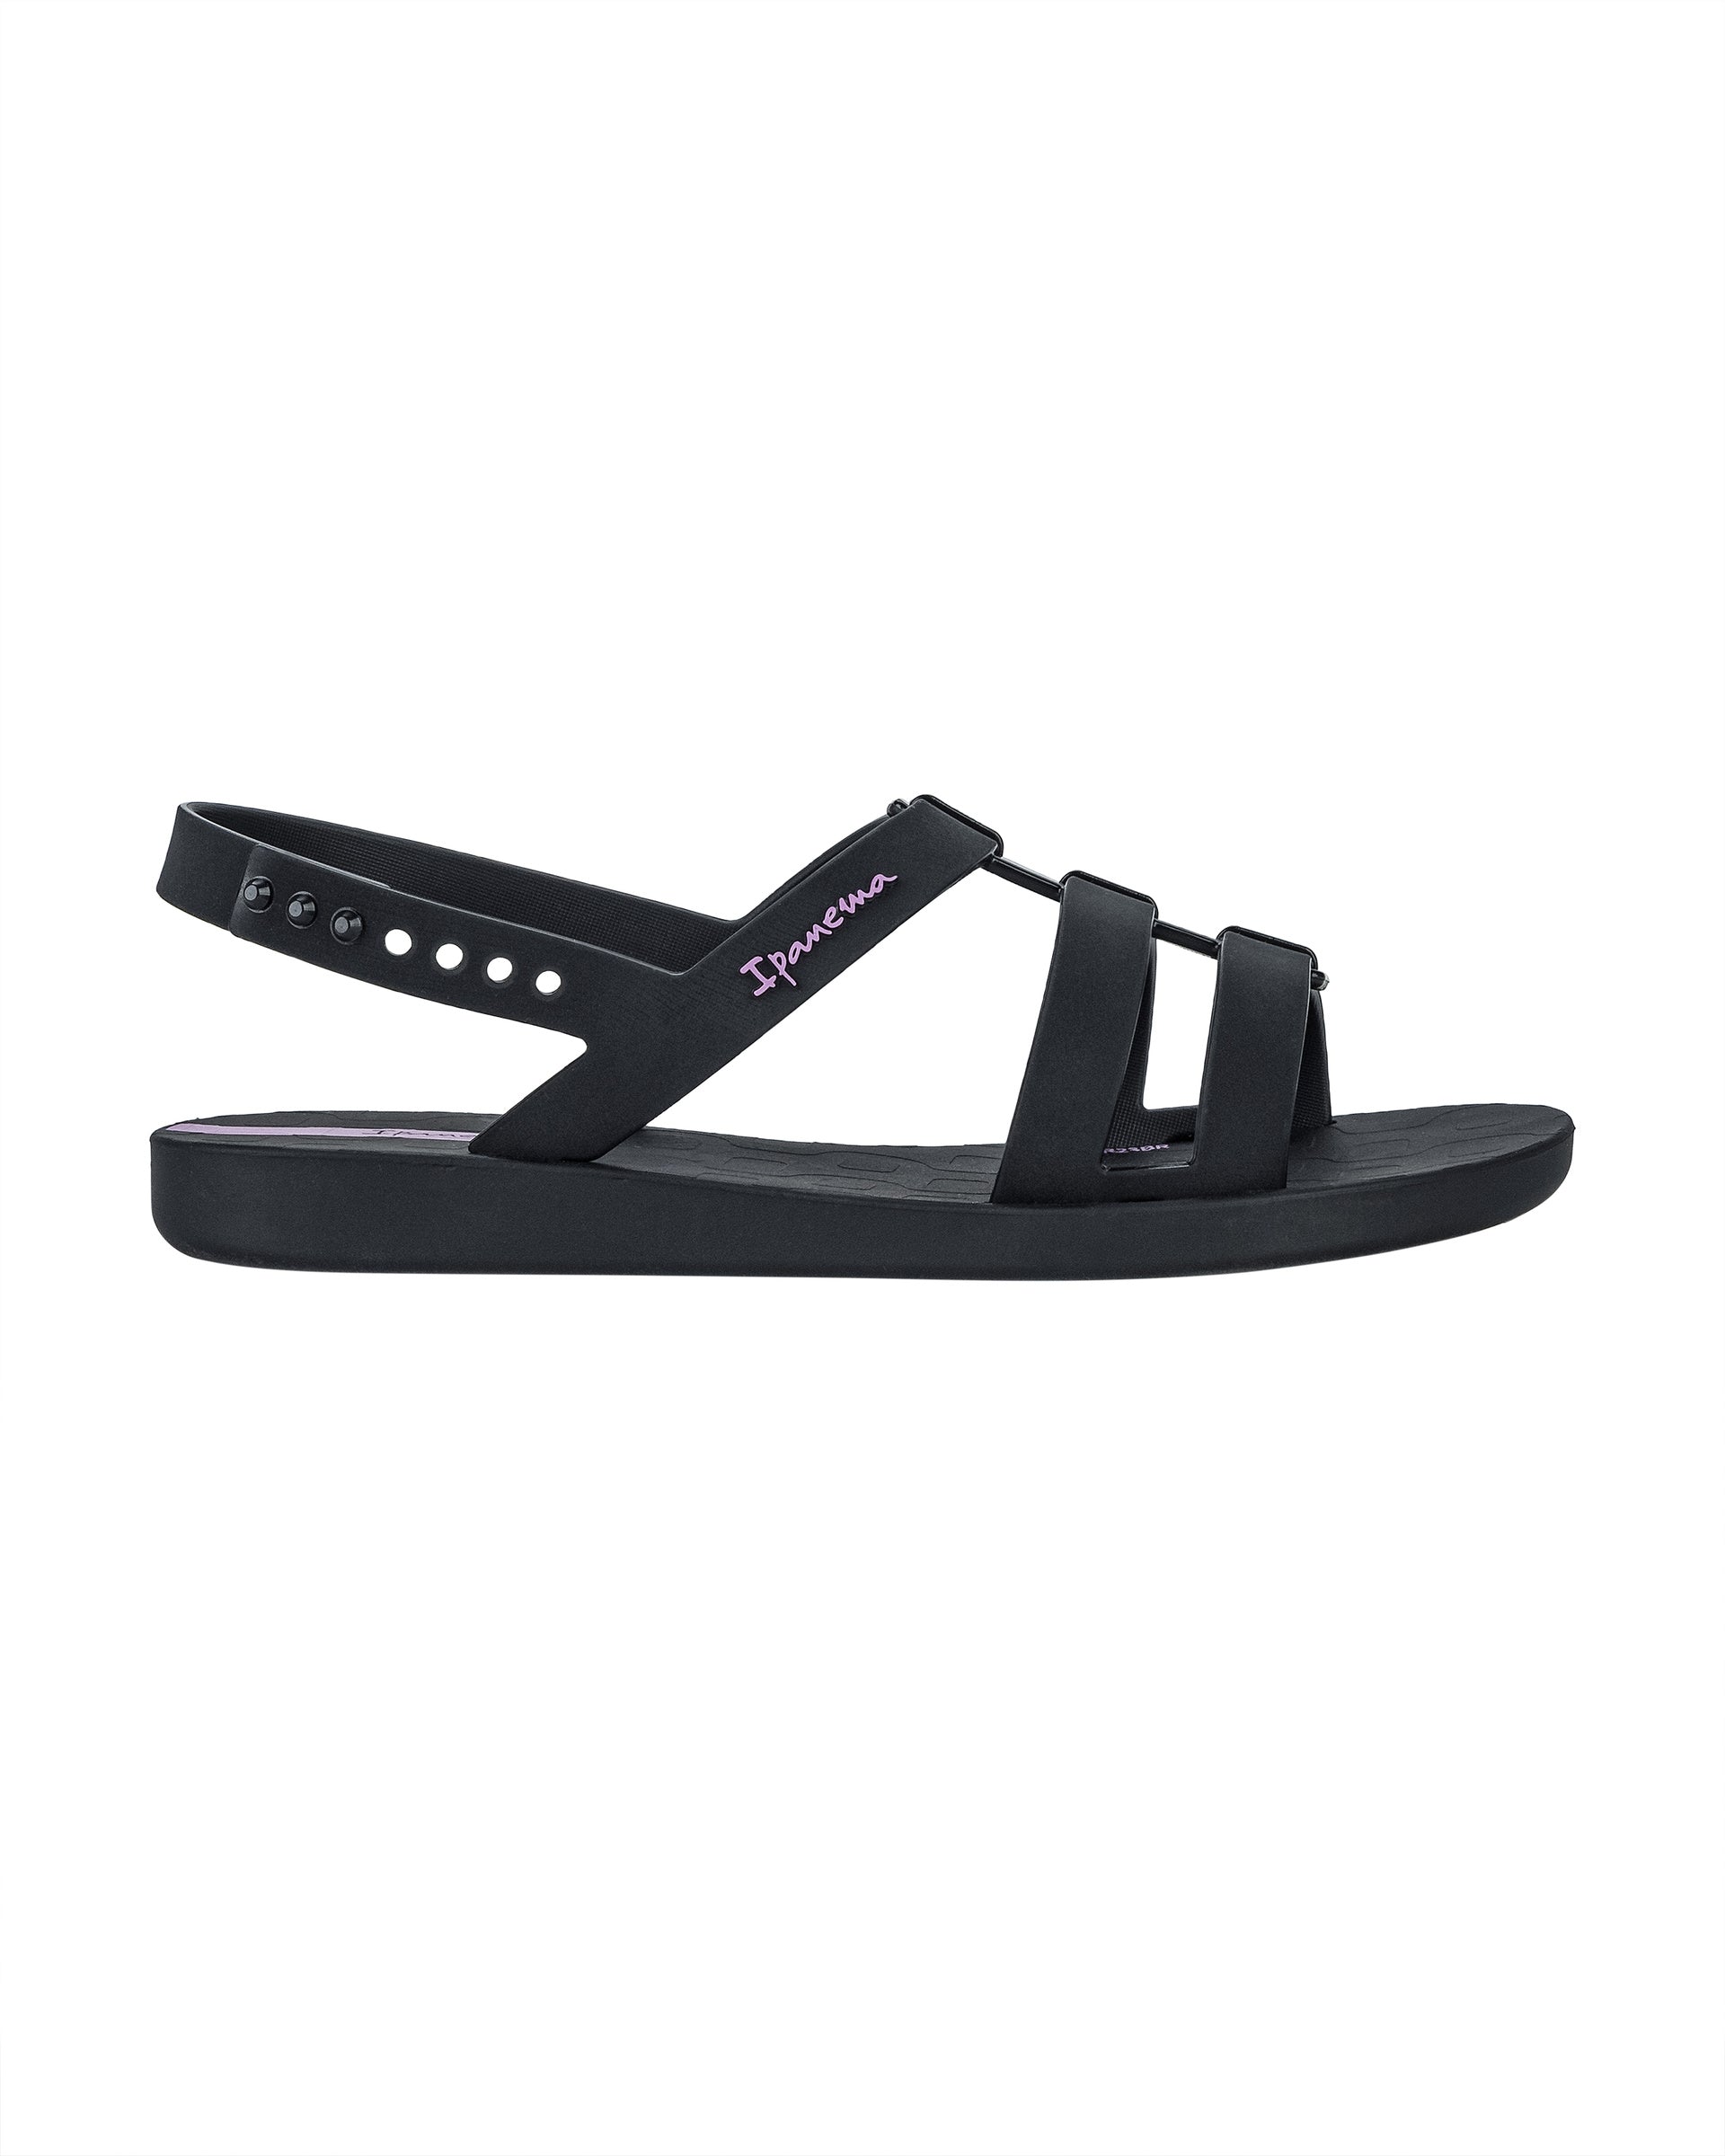 Outer side view of a black Ipanema Class Go women's sandal.